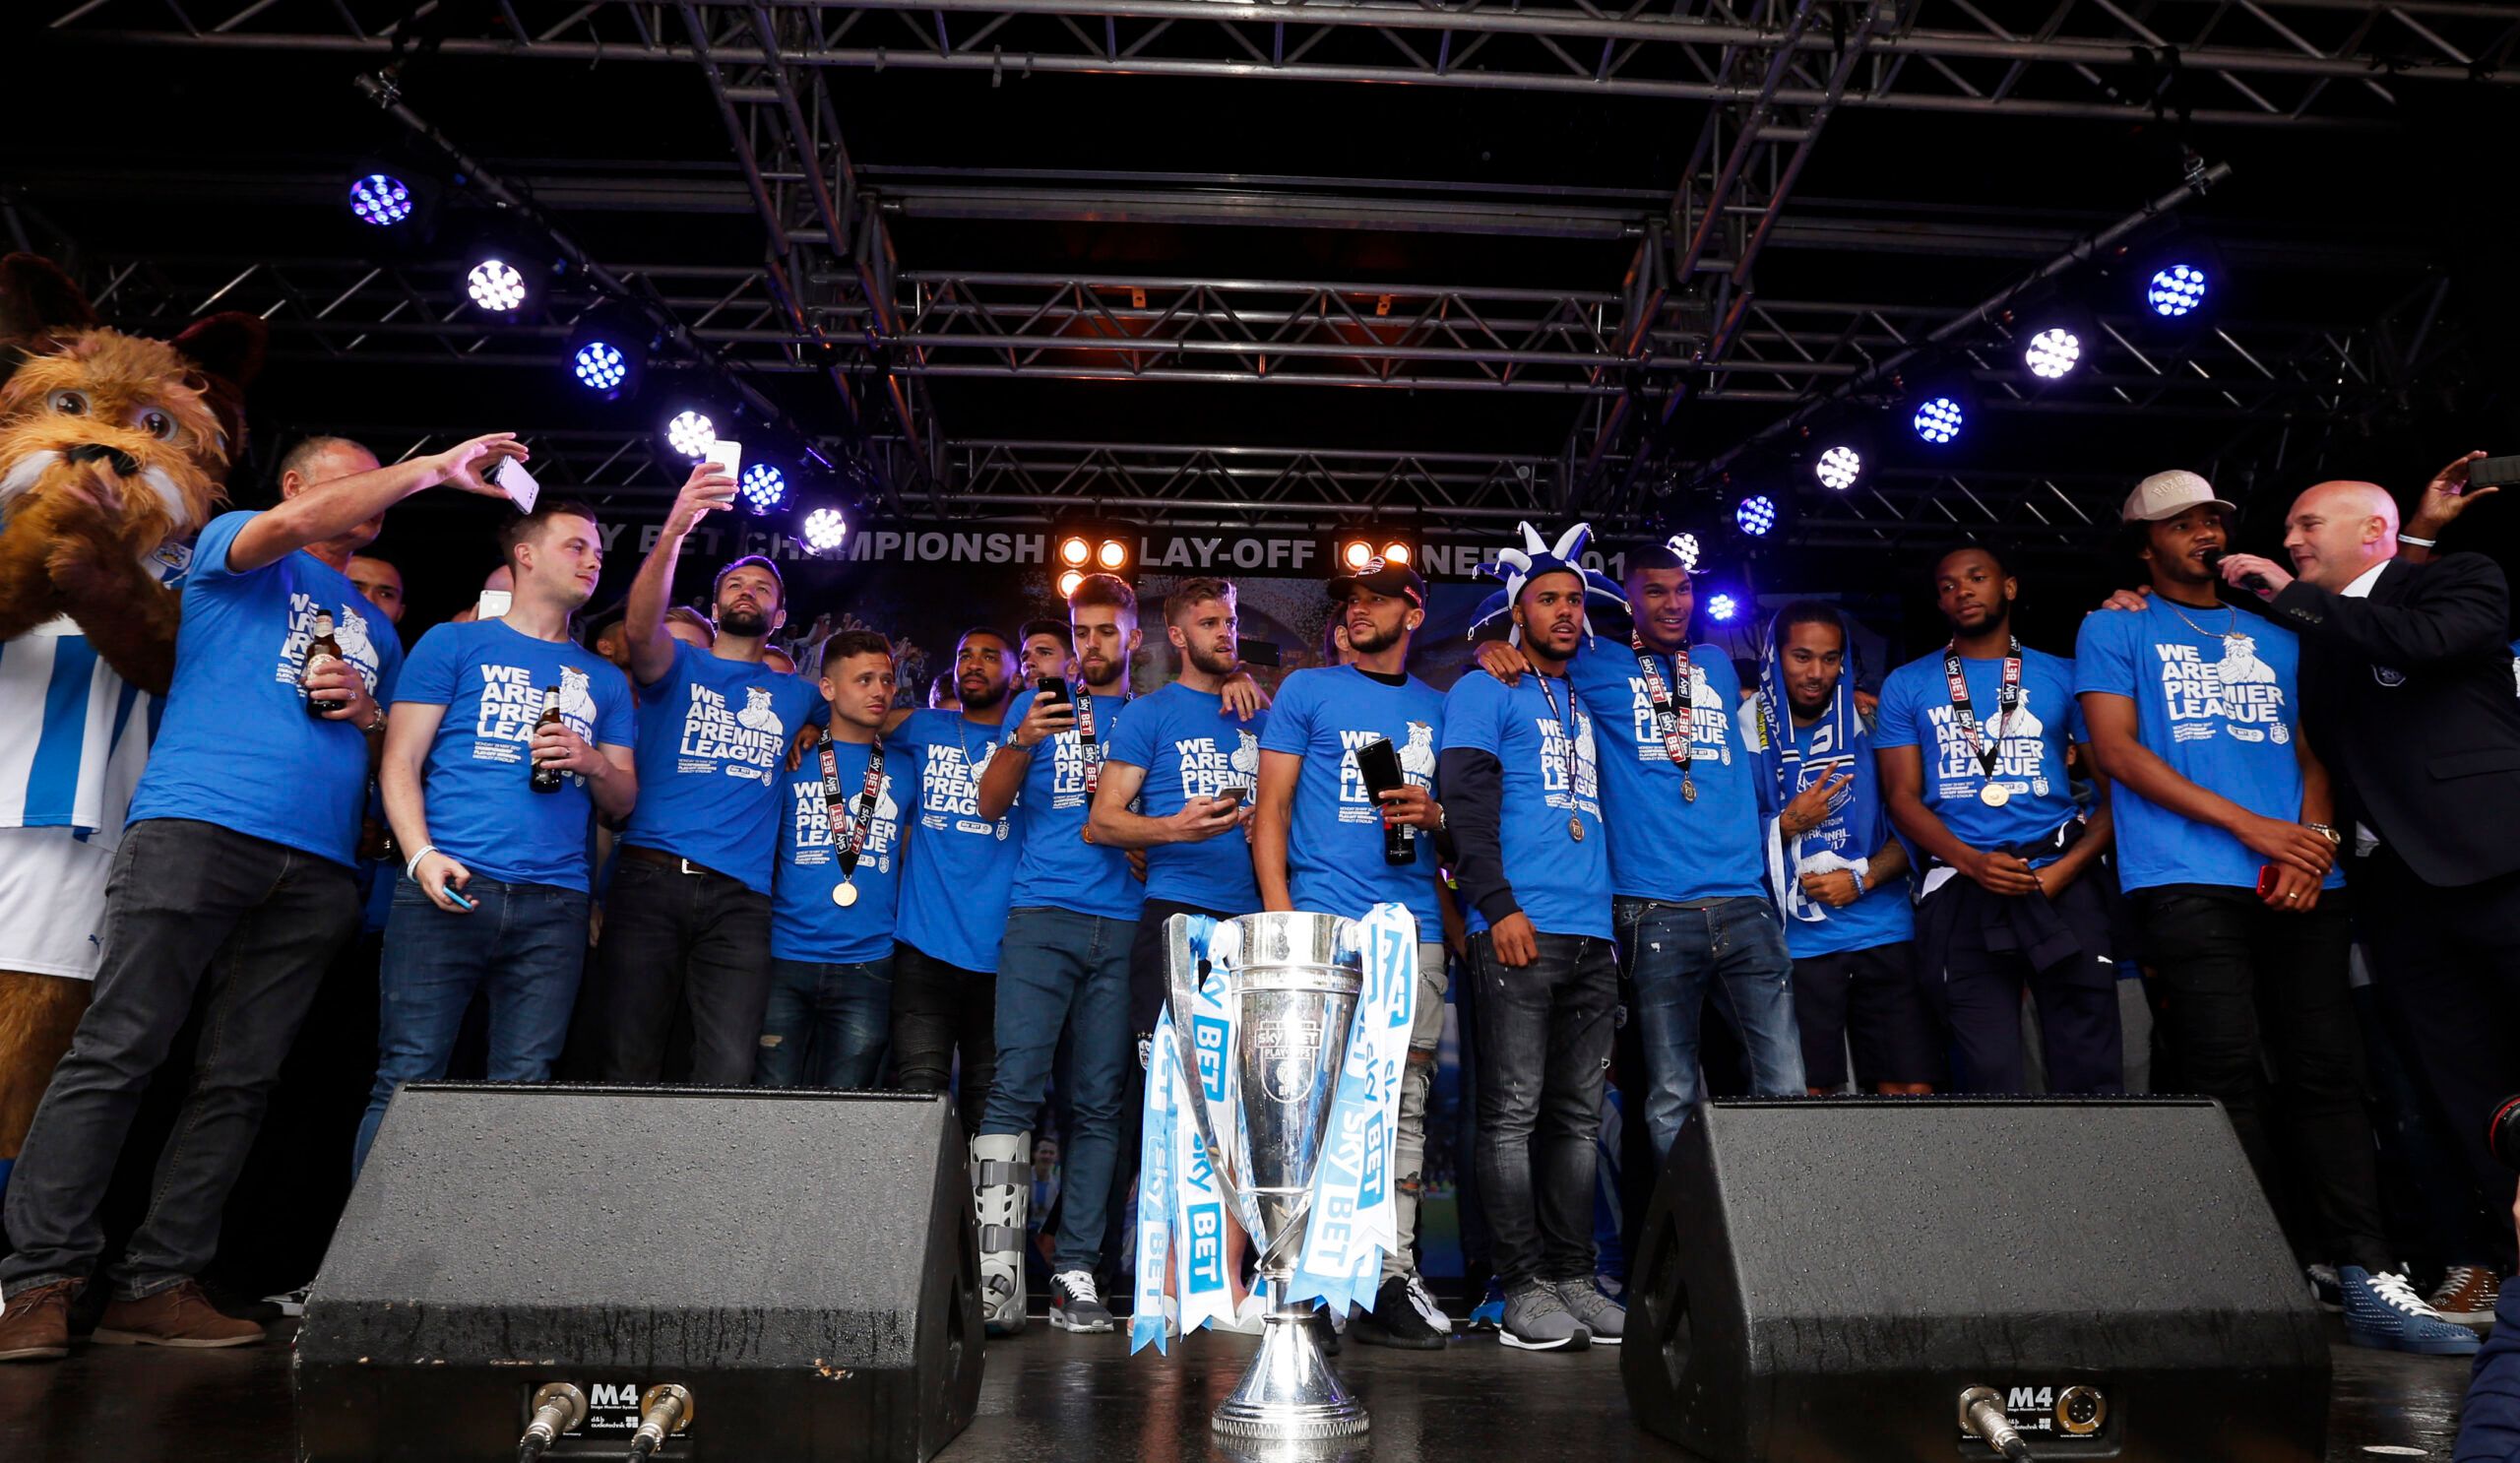 Britain Soccer Football - Huddersfield Town - Premier League Promotion Winners Parade - Huddersfield - 30/5/17 Huddersfield Town celebrate with the trophy during the parade Action Images via Reuters / Ed Sykes Livepic EDITORIAL USE ONLY.